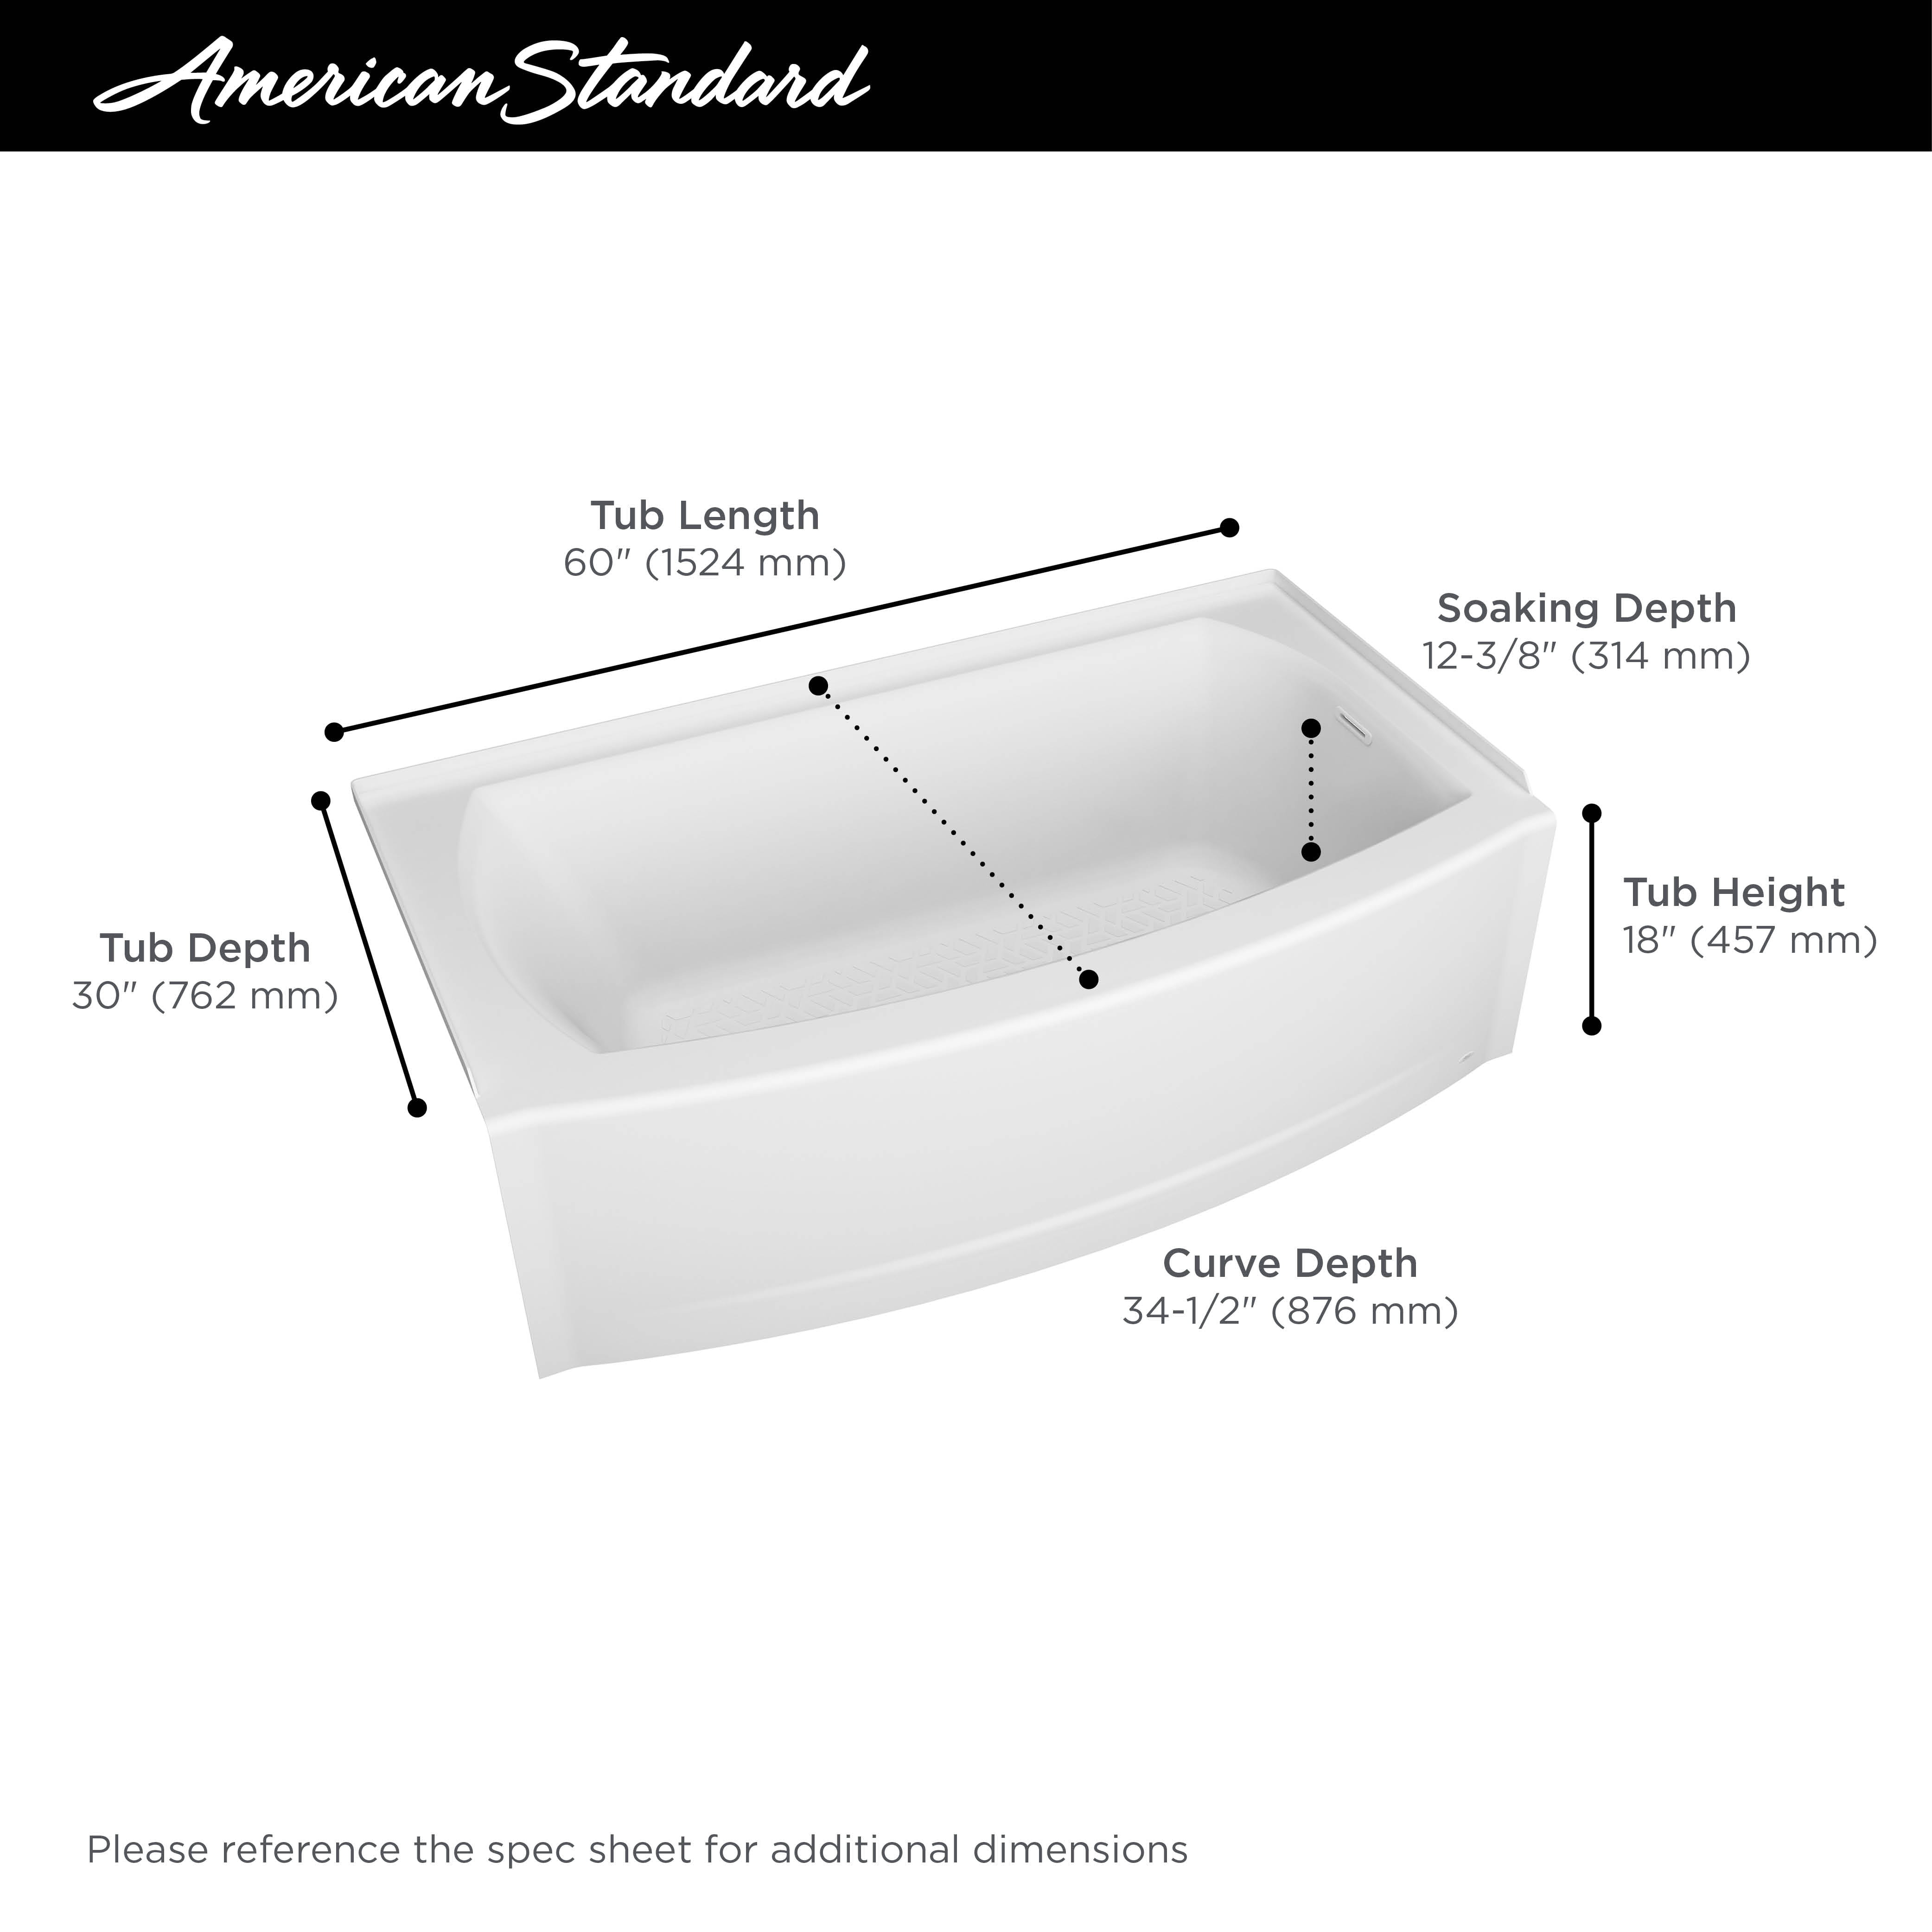 Ovation Curve™ 5x30-inch Integral Apron Bathtub with Right-hand Outlet with Deep Soak Drain